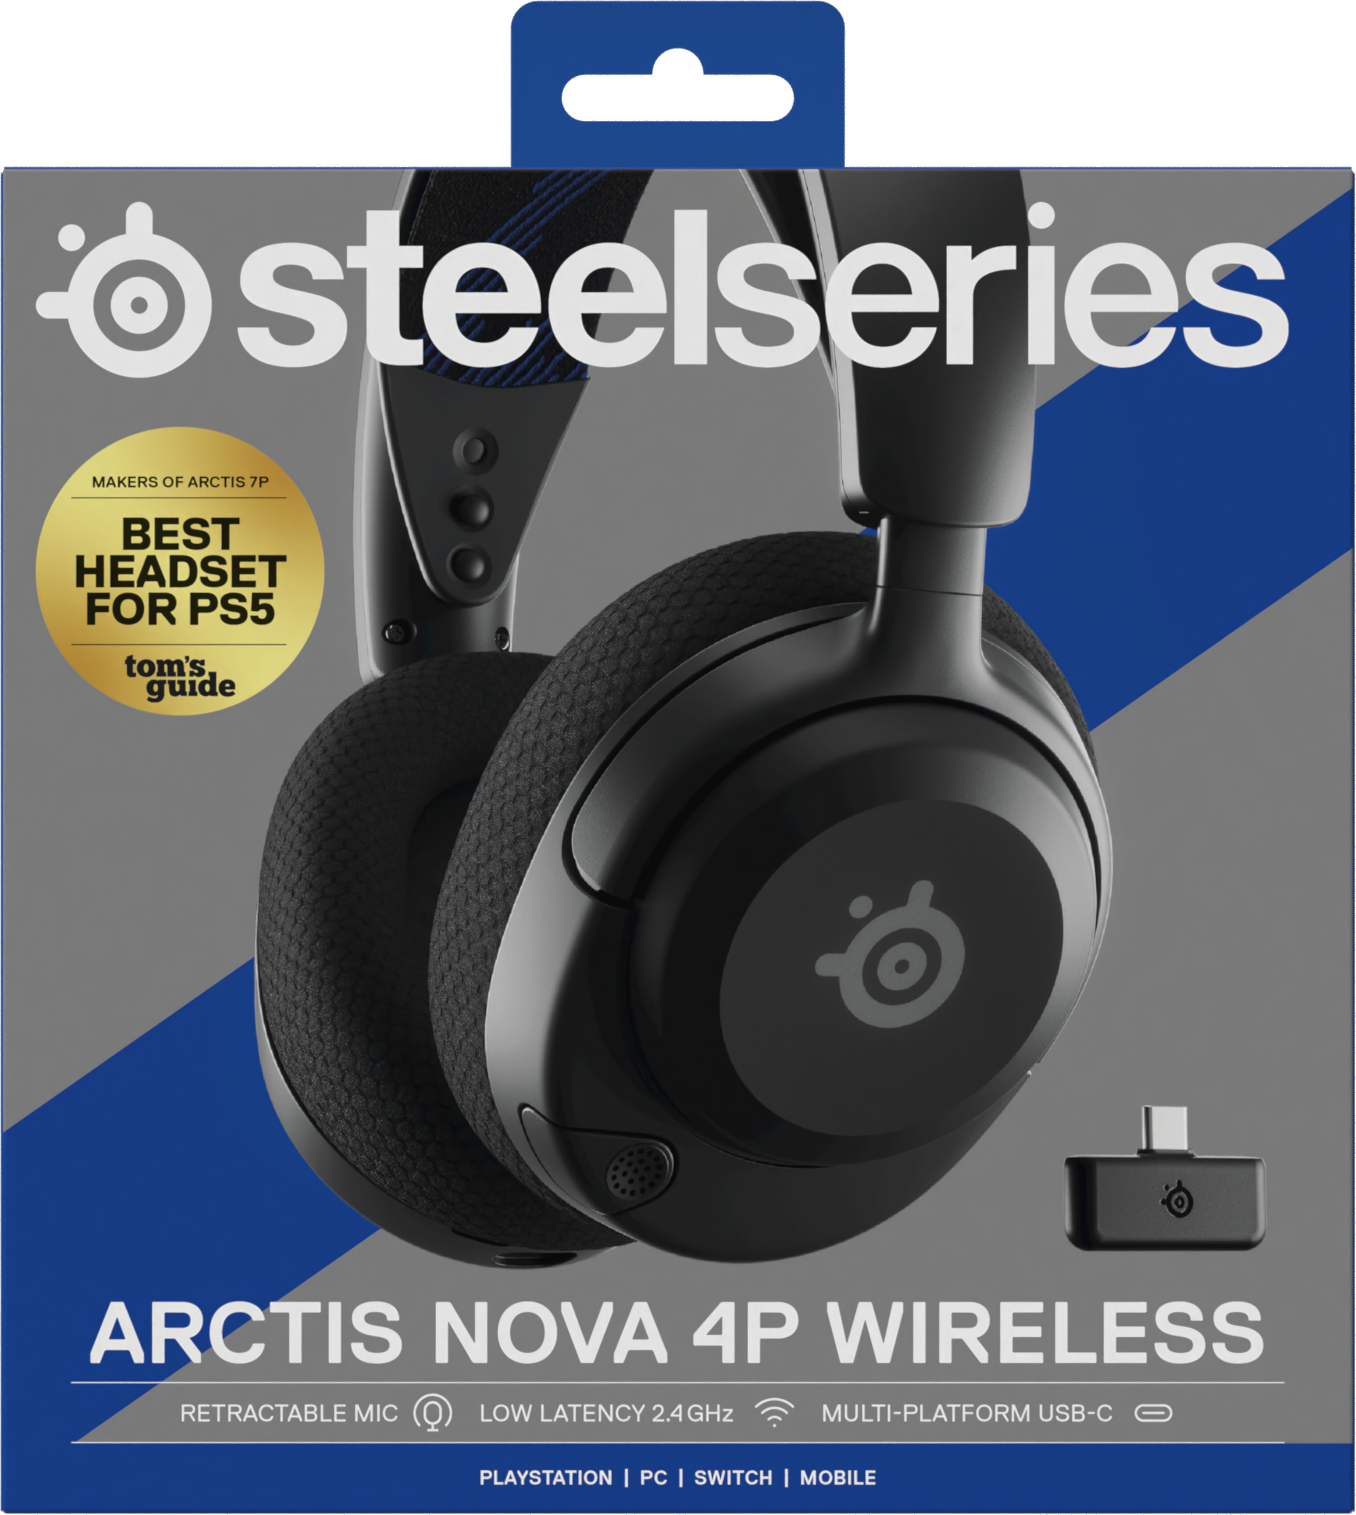 SteelSeries Arctis Nova 4P Quest for Switch, PlayStation Gaming | PC, Wireless Headset GameStop 2, Meta